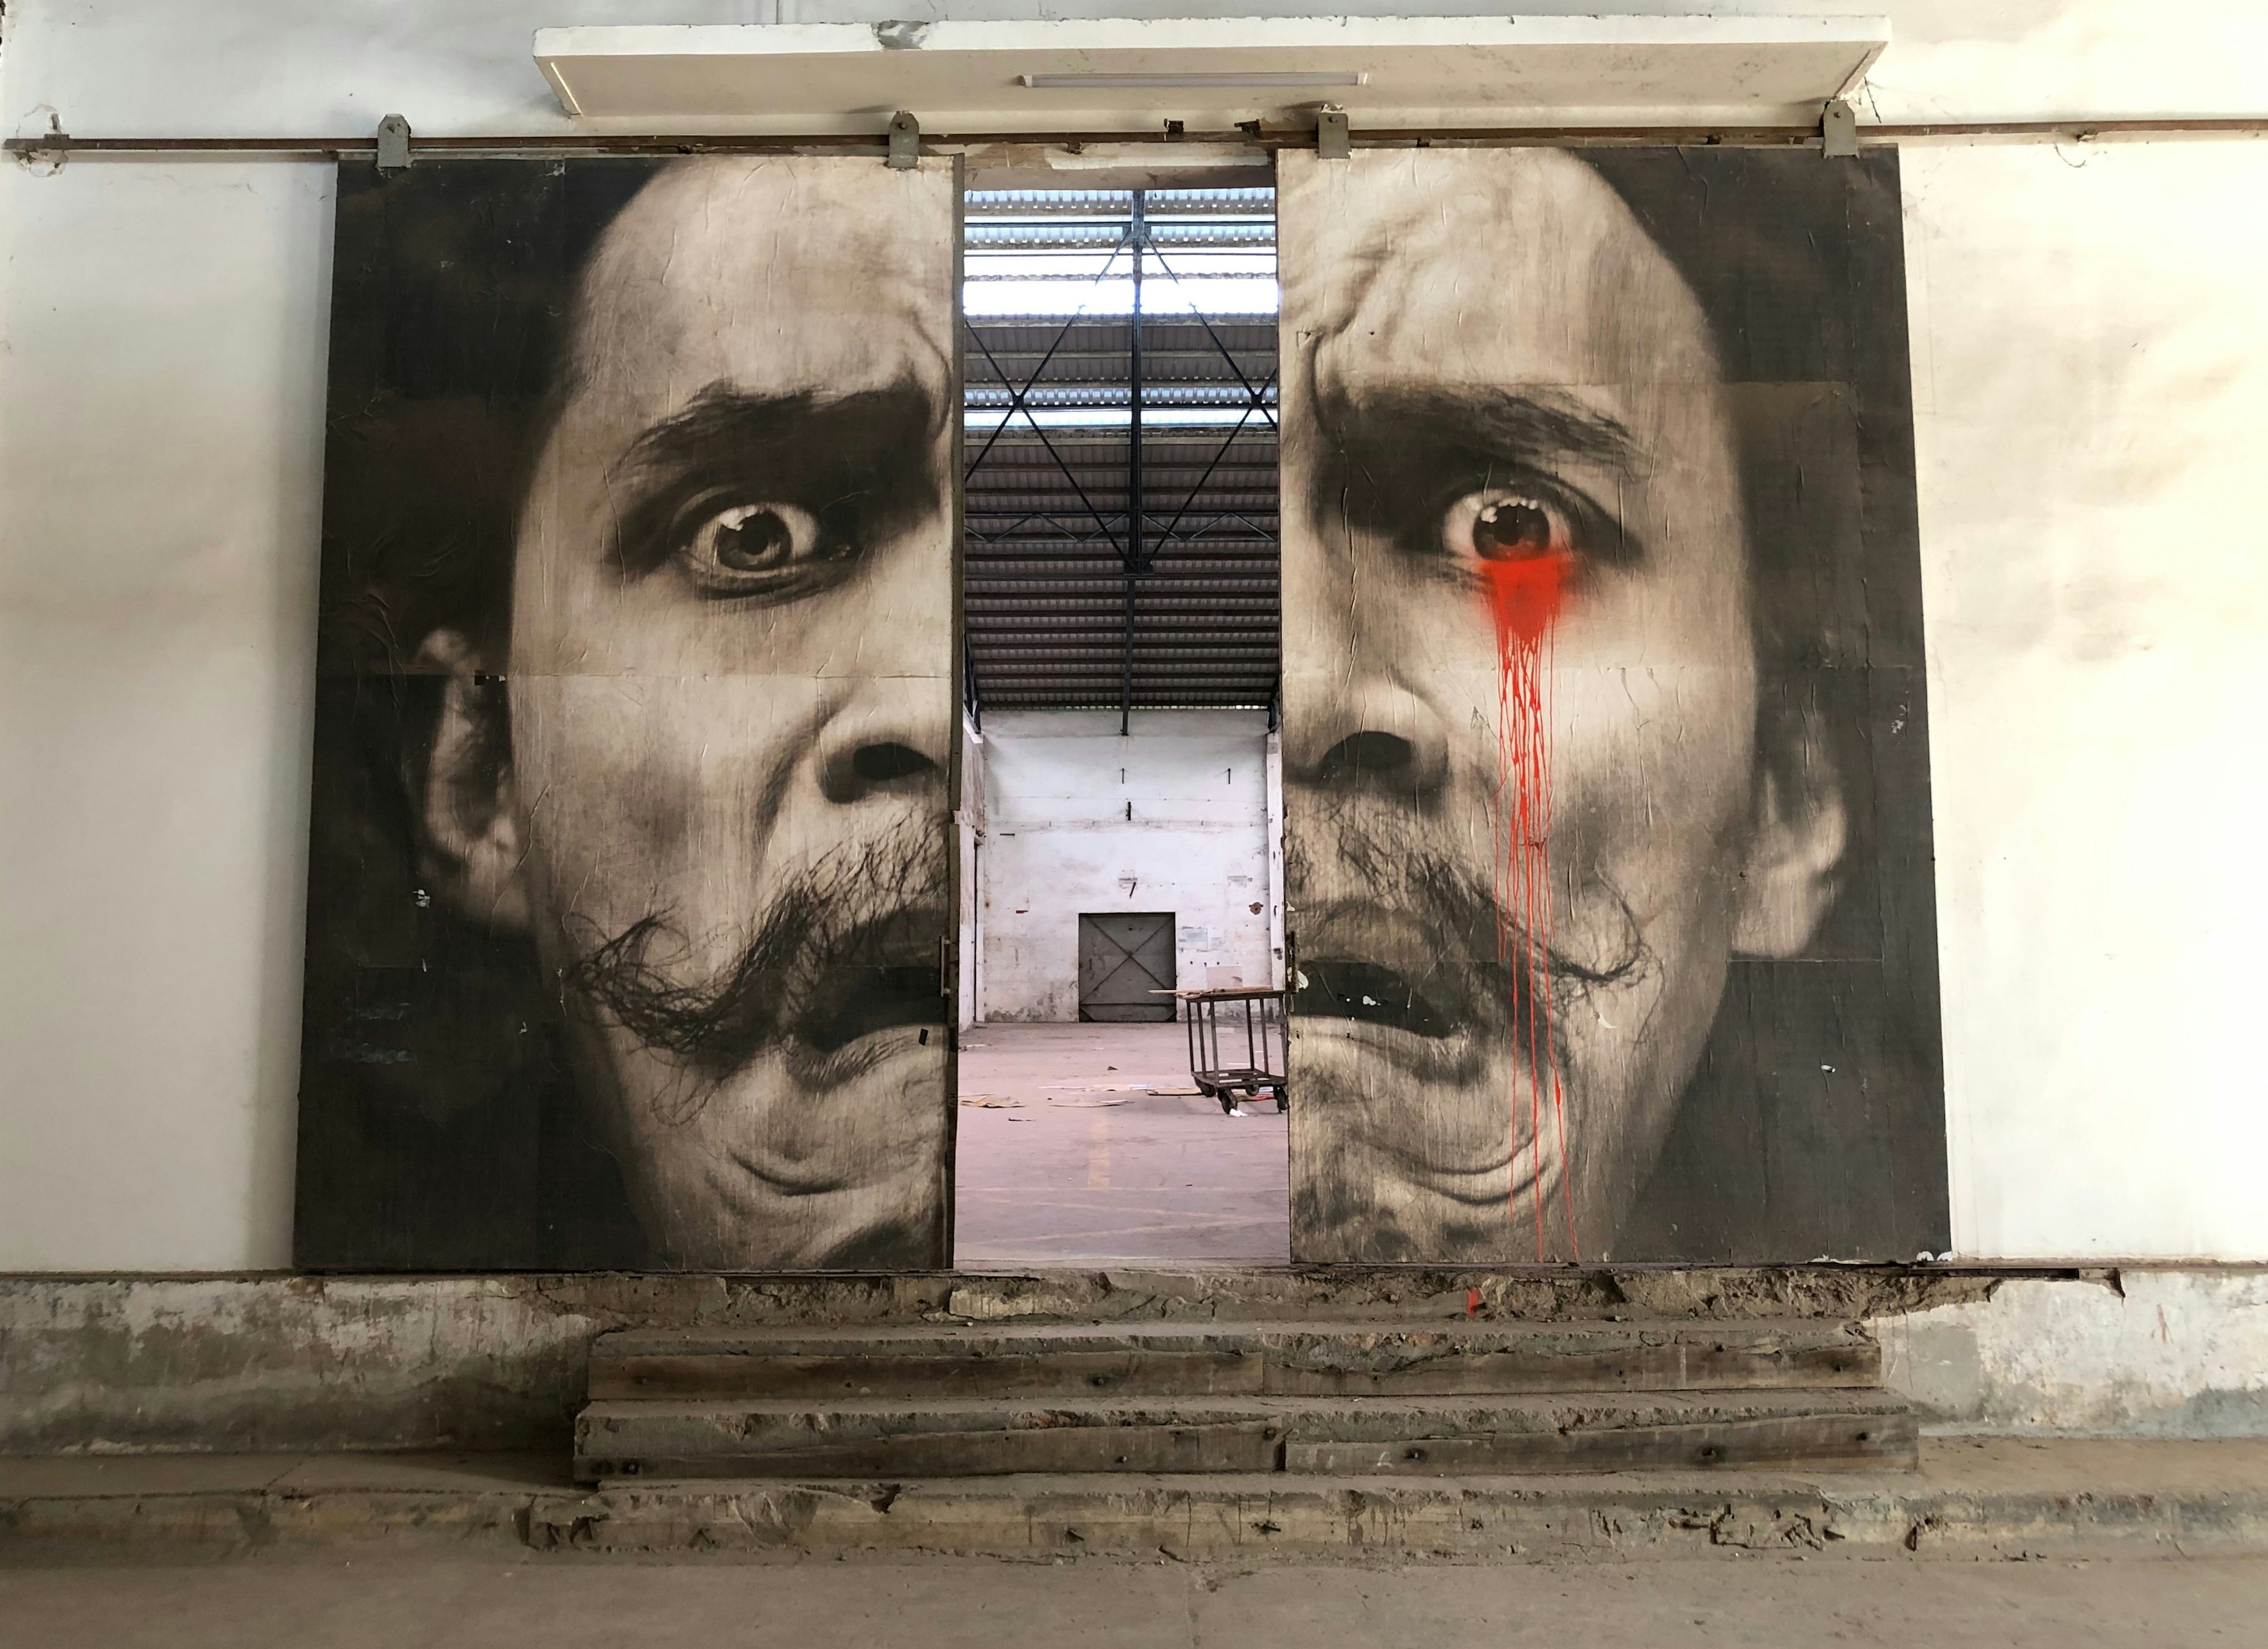 A mural of Salvador Dalí has been painted on two huge doors on rollers; the doors are partly open, so his contorted face is pulled apart. Through the doors is an almost empty, open industrial space.